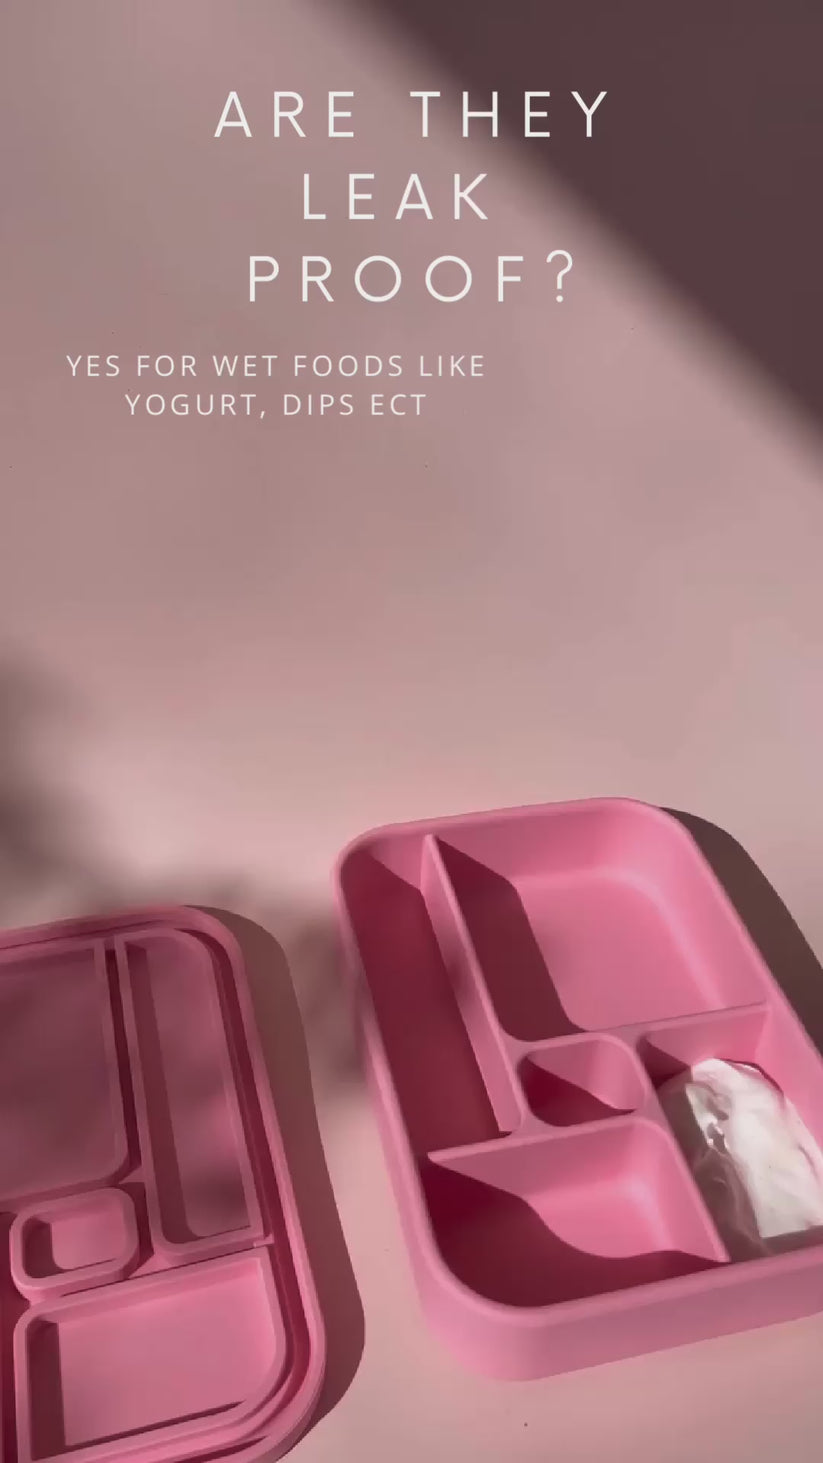 Video showing leakproof nature of Bento Lunchboxes from The Zero Waste People